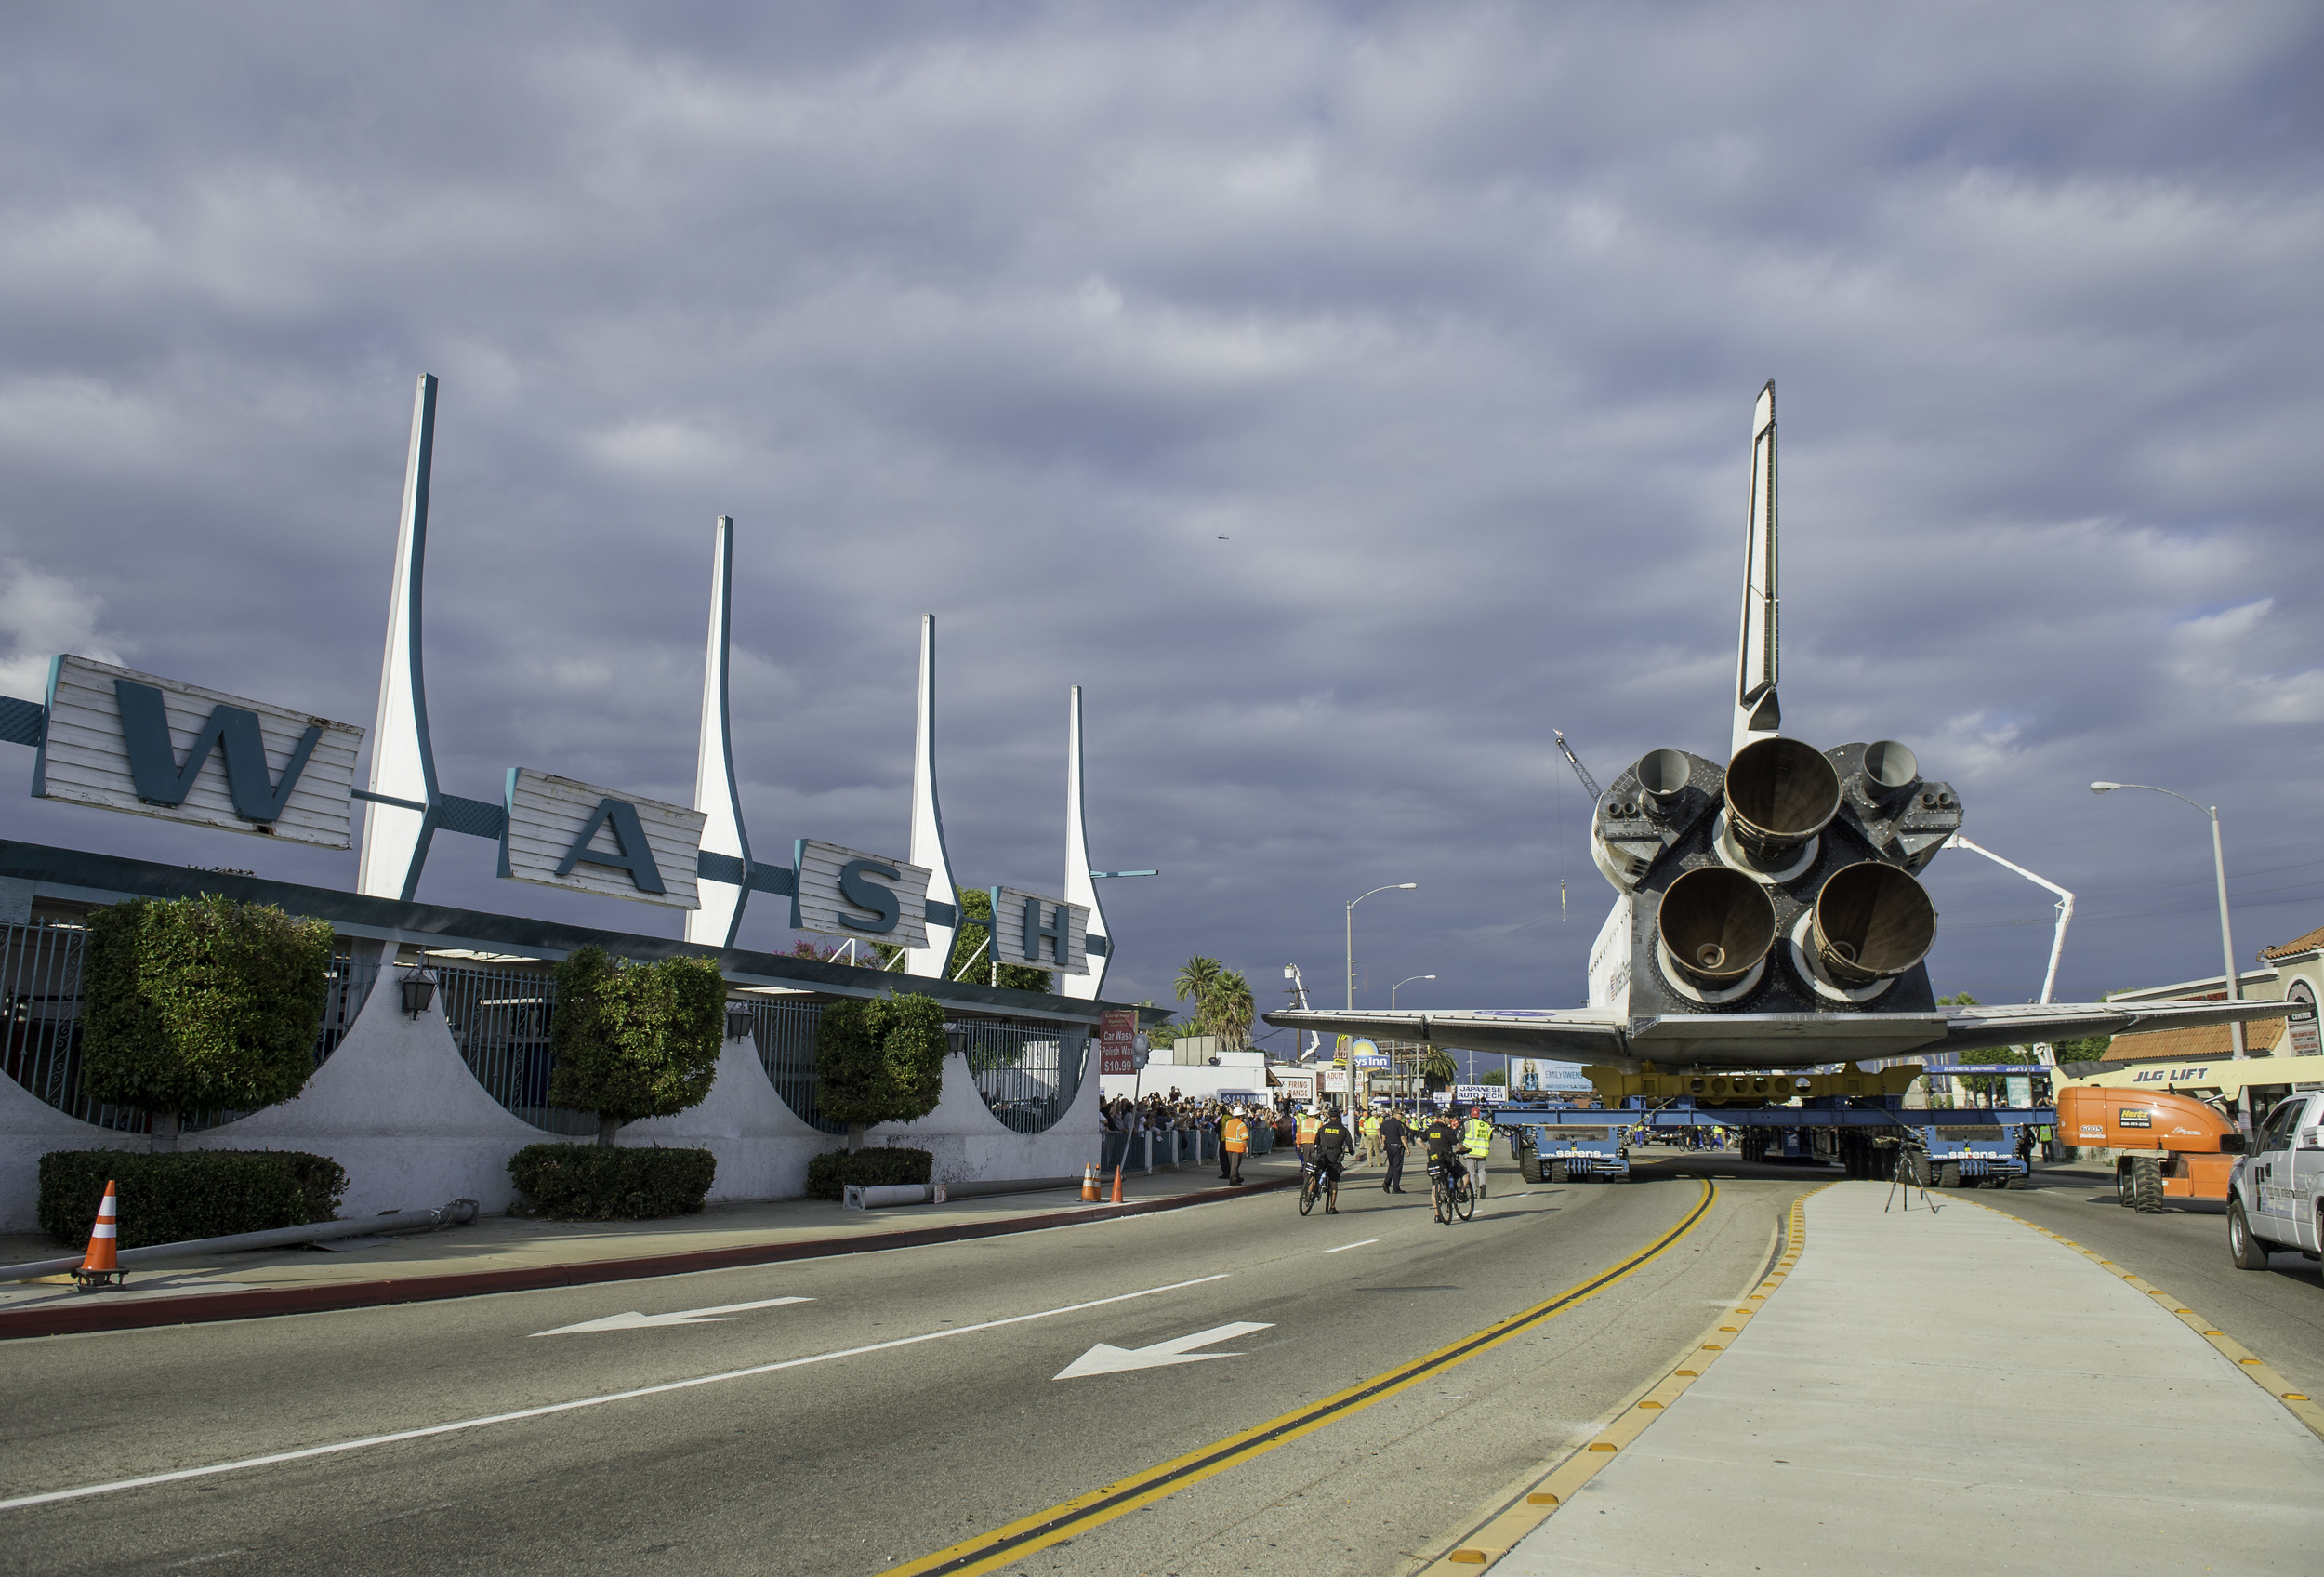  Space shuttle Endeavour is seen passing a car wash on its way to its new home at the California Science Center in Los Angeles, Friday, Oct. 12, 2012. Endeavour, built as a replacement for space shuttle Challenger, completed 25 missions, spent 299 da